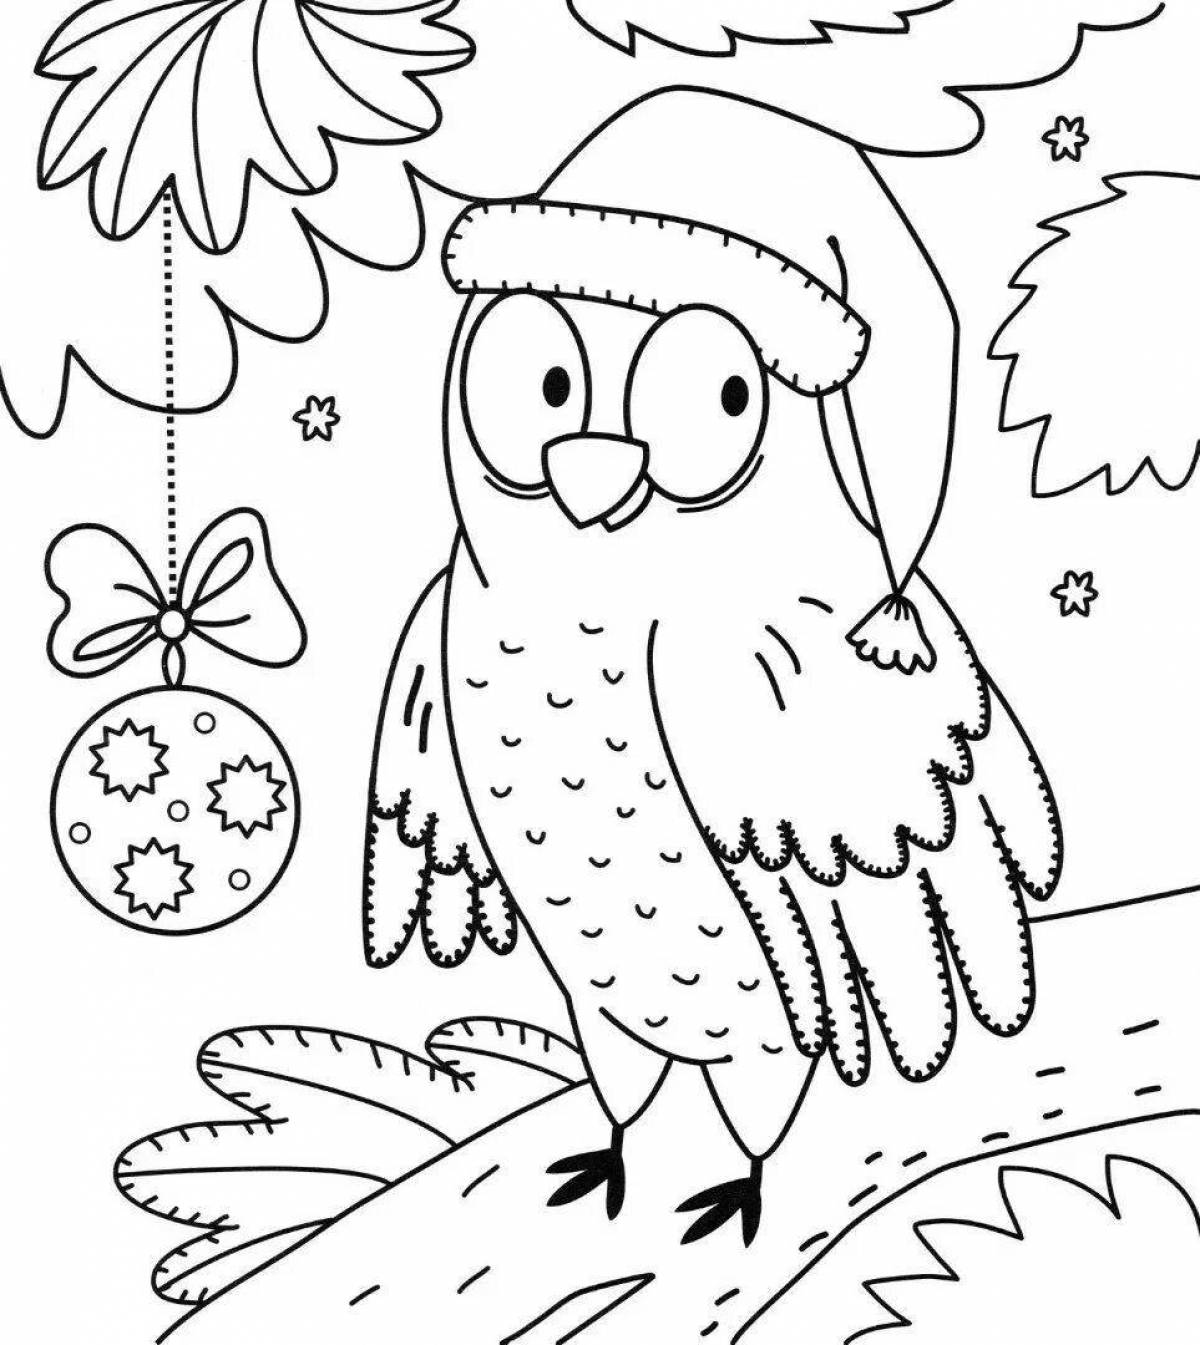 Glowing winter birds coloring pages for kids